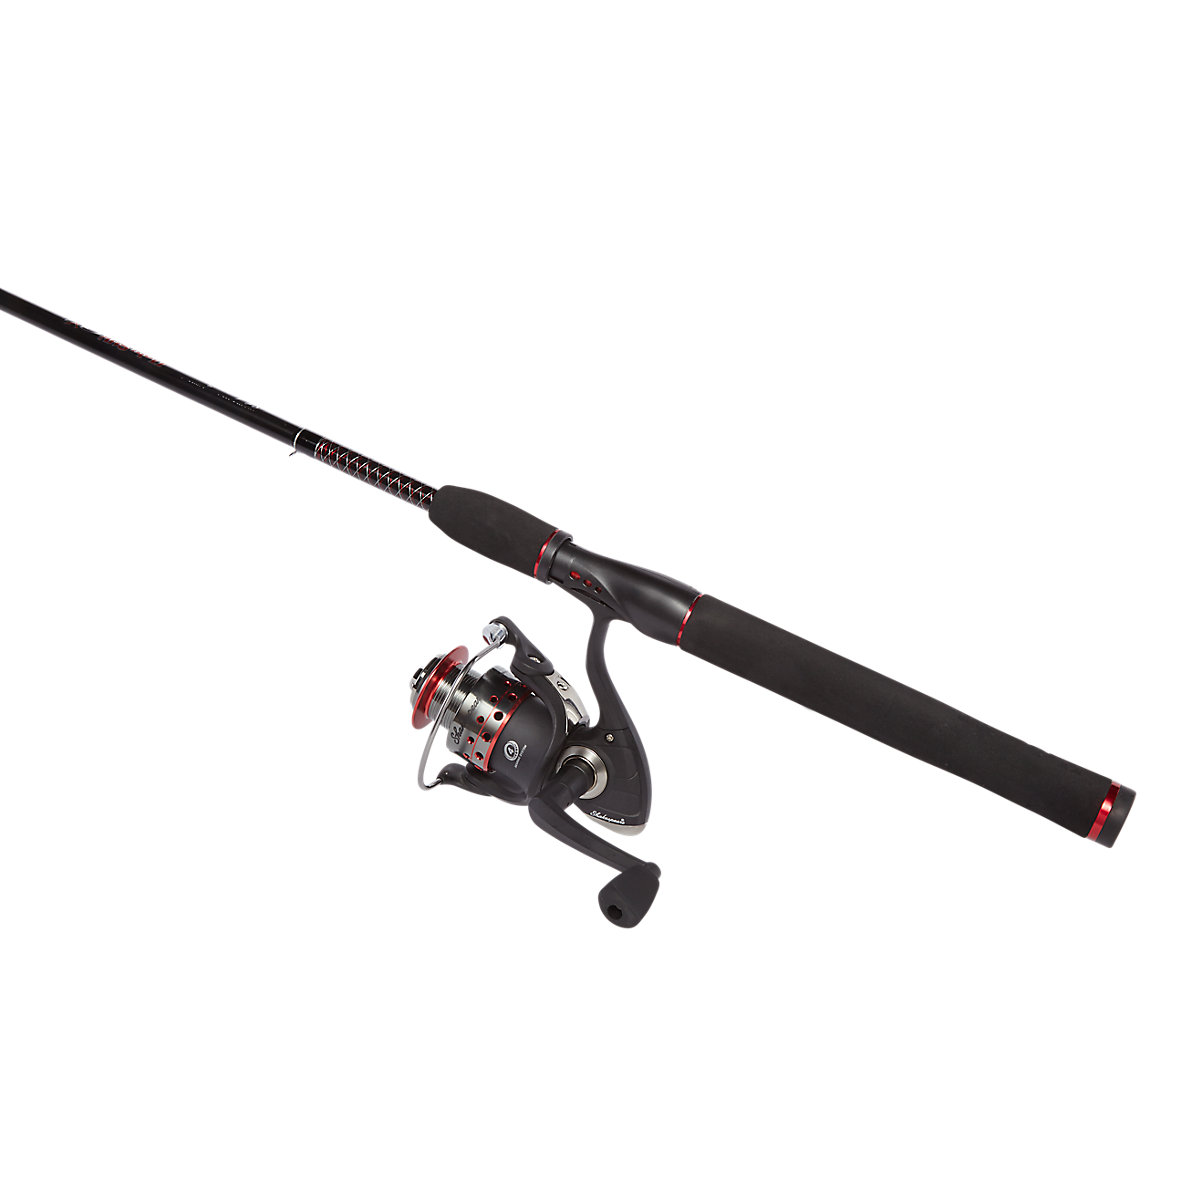 Ugly Stik 6’6” GX2 Spinning Fishing Rod and Reel Spinning Combo - image 3 of 20